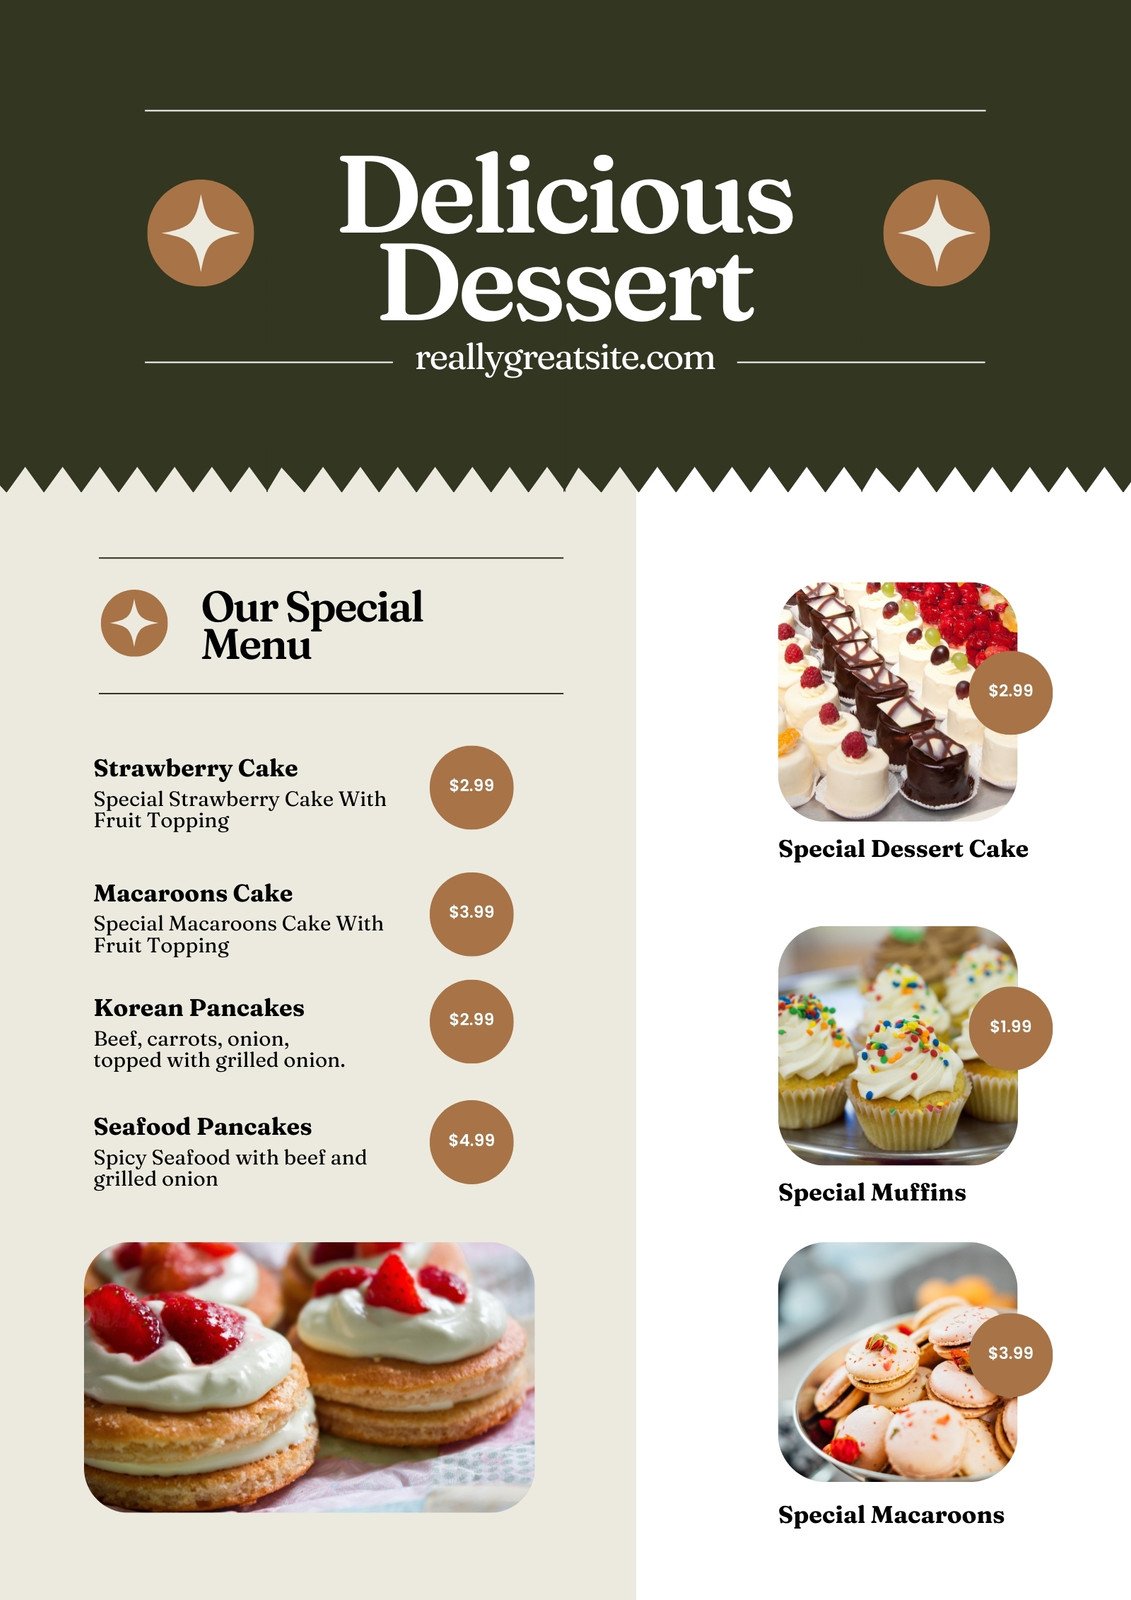 Bakery's Offers List with Piece of Cake on Red Online Menu Template -  VistaCreate